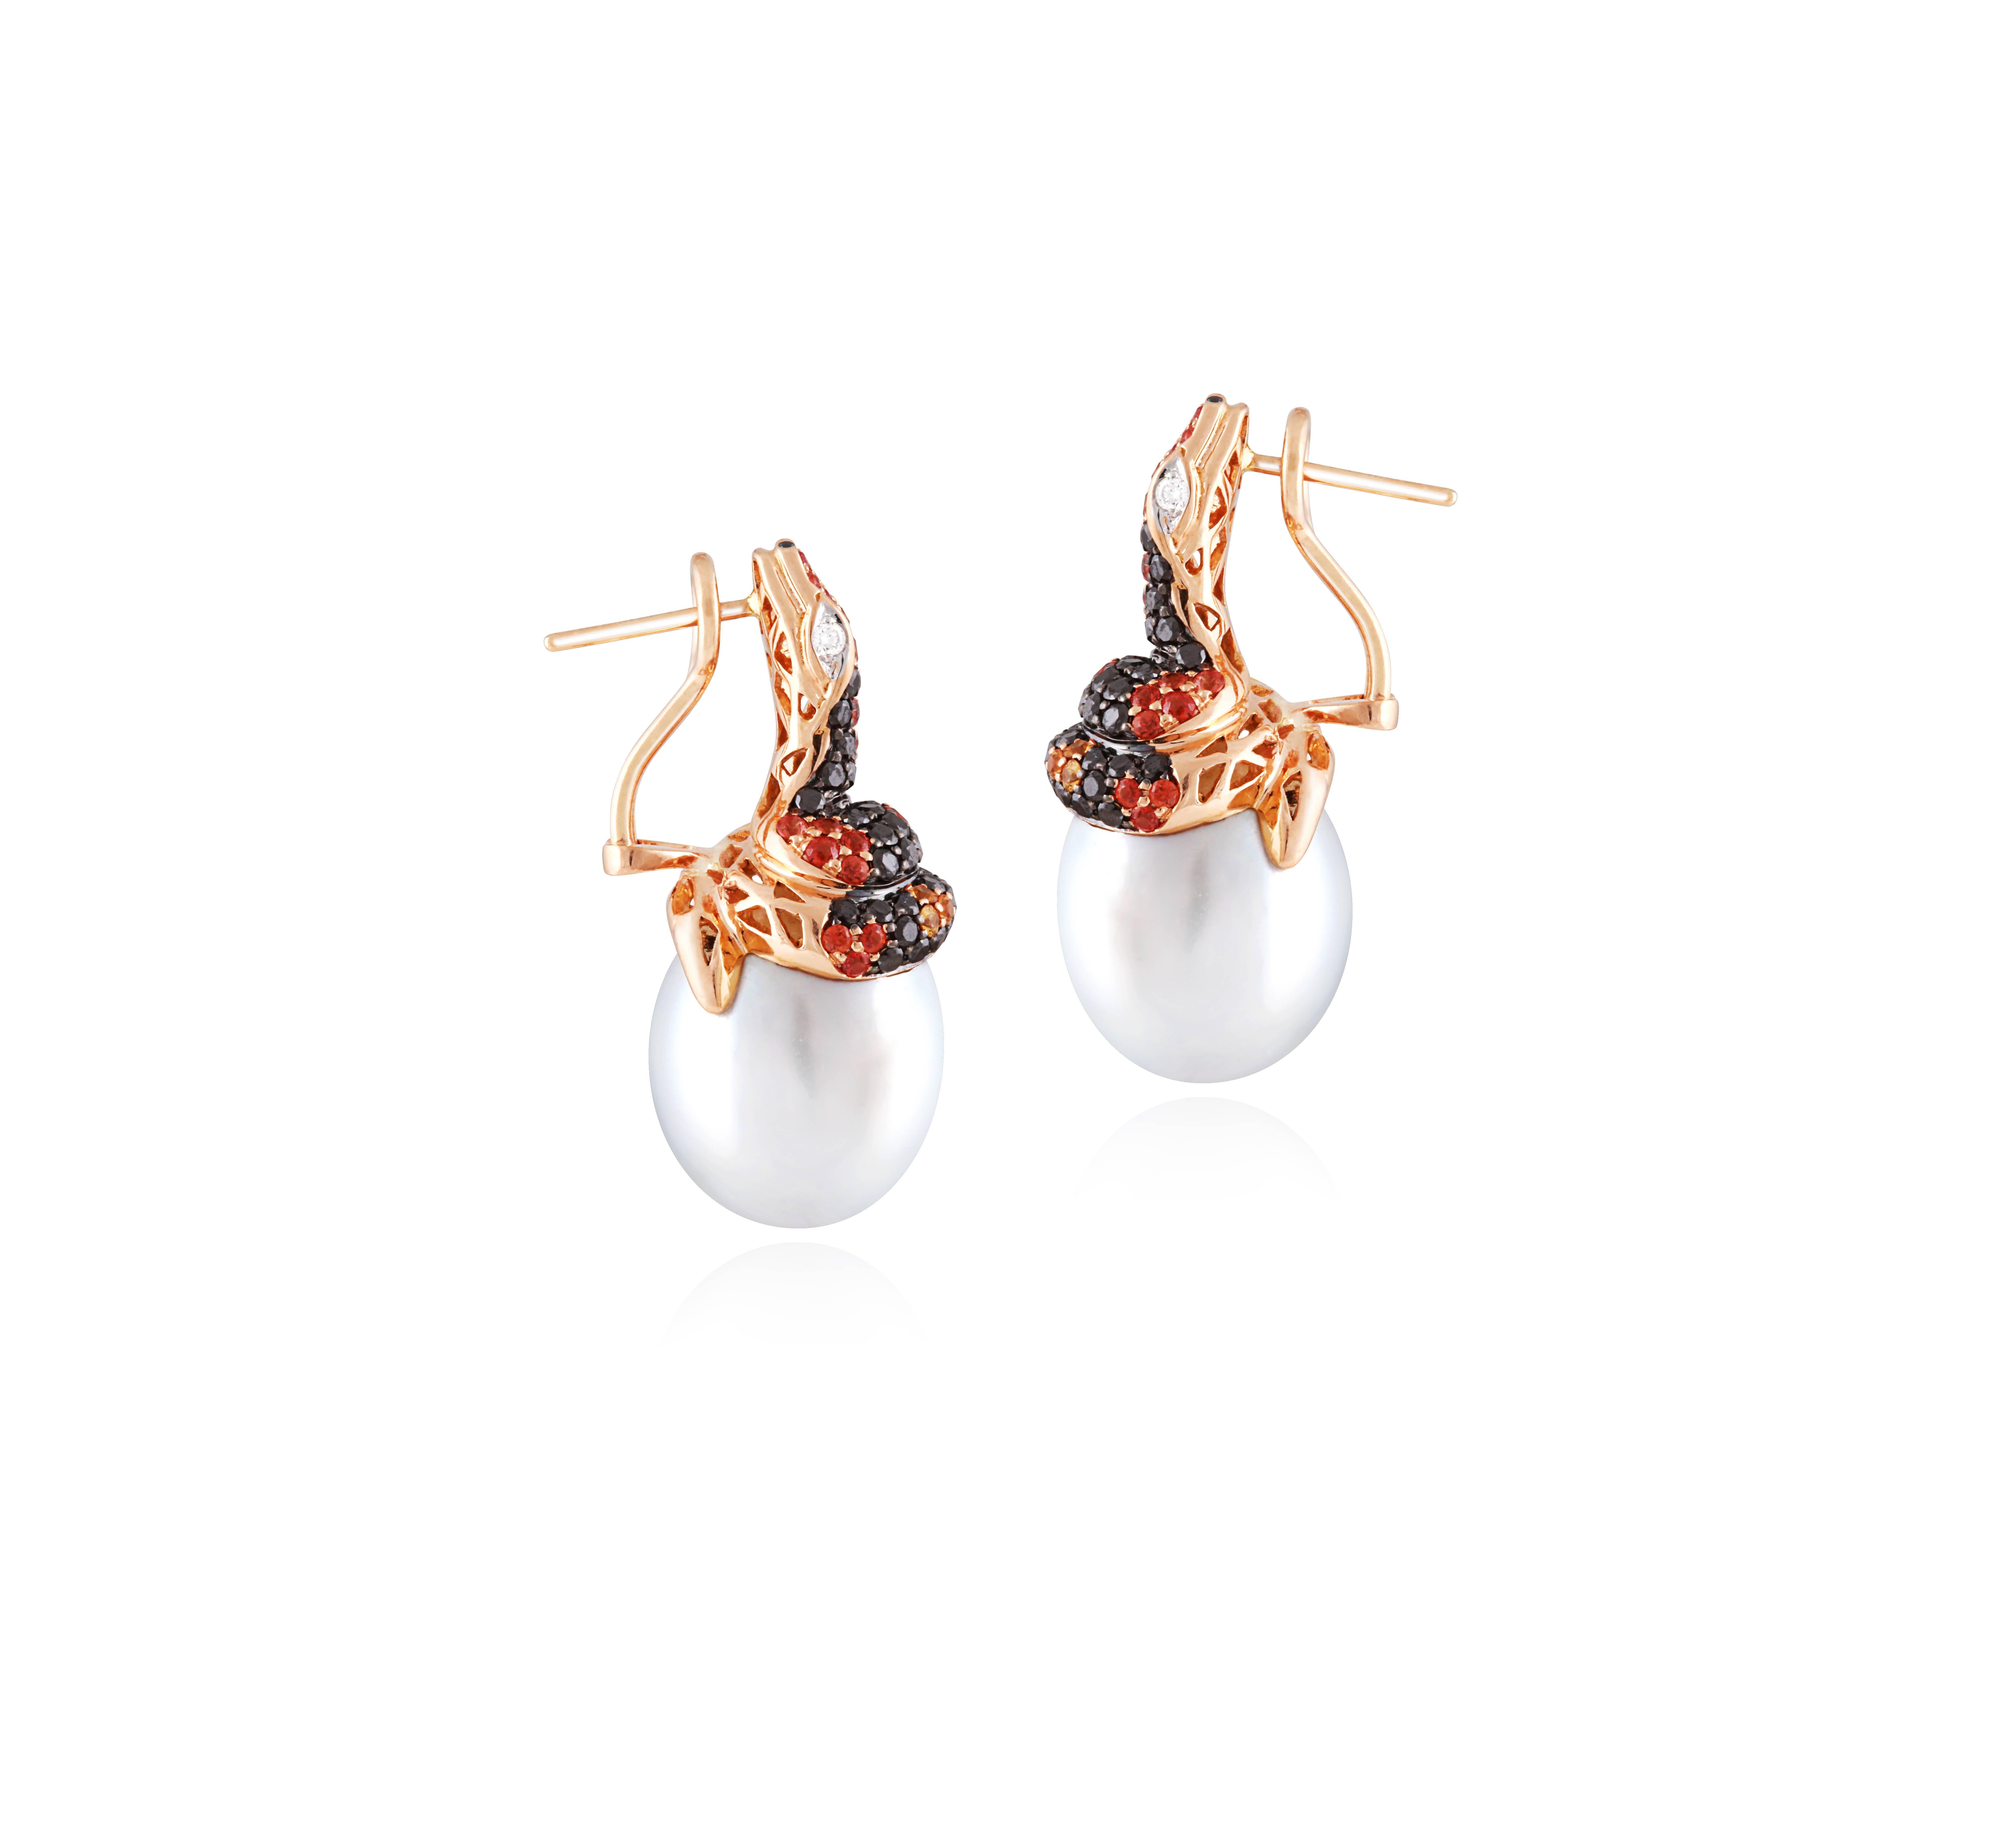 These Elegant Snake Earrings are created with Australian South Sea Pearls measuring 14.5 mm in diameter.  The snakes are adorned by  100 pieces of black diamonds weighing 1.39 Cts, 73 stones with two tones of Orange Sapphires with a weight of 1.06